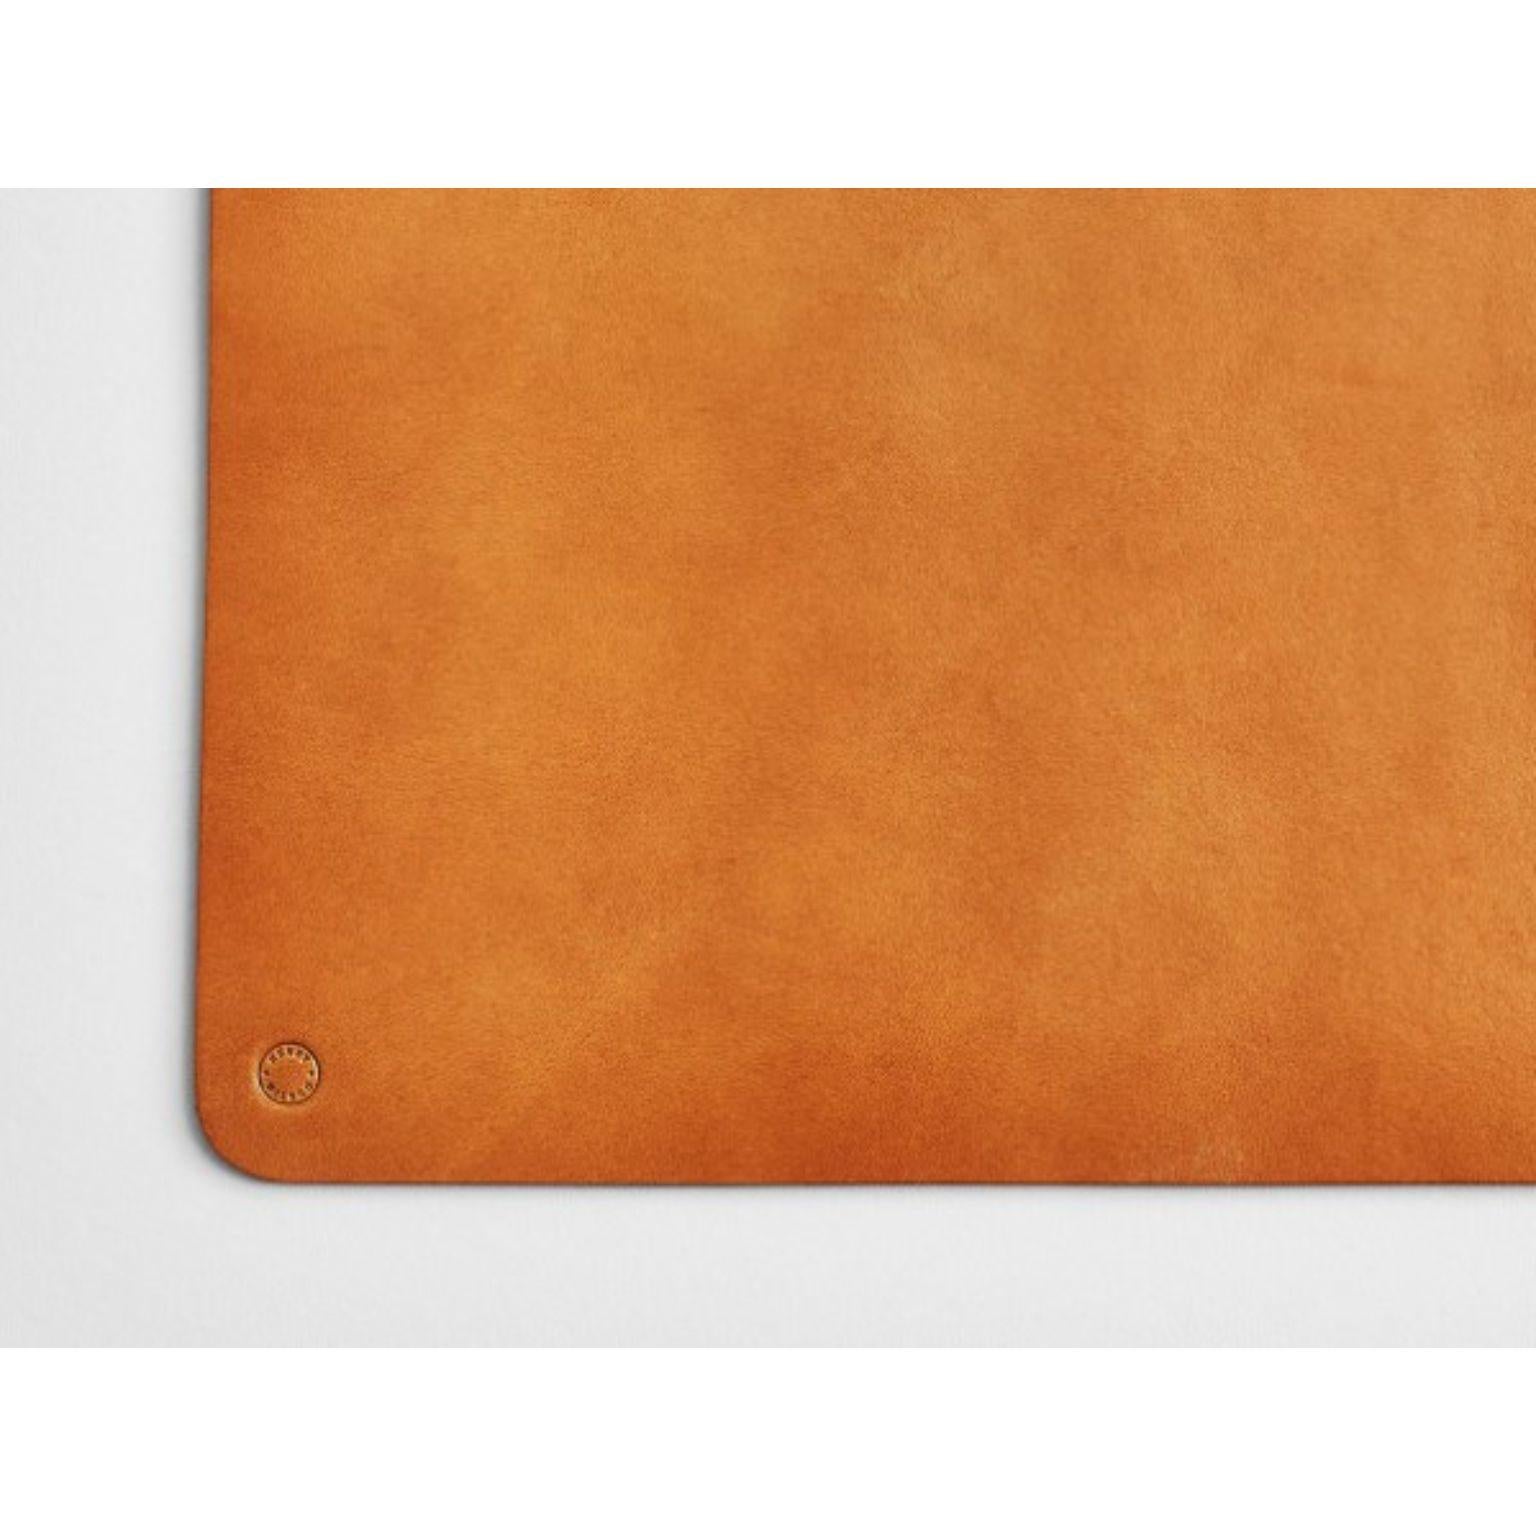 Set of 2 Small Leather Desk Mats by Henry Wilson
Dimensions: W 32 x D 22 x H 0.4 cm
Materials: Leather

Our leather desk mats are made of vegetable tanned saddle leather imported from Italy. This type of leather is thick and durable, and its